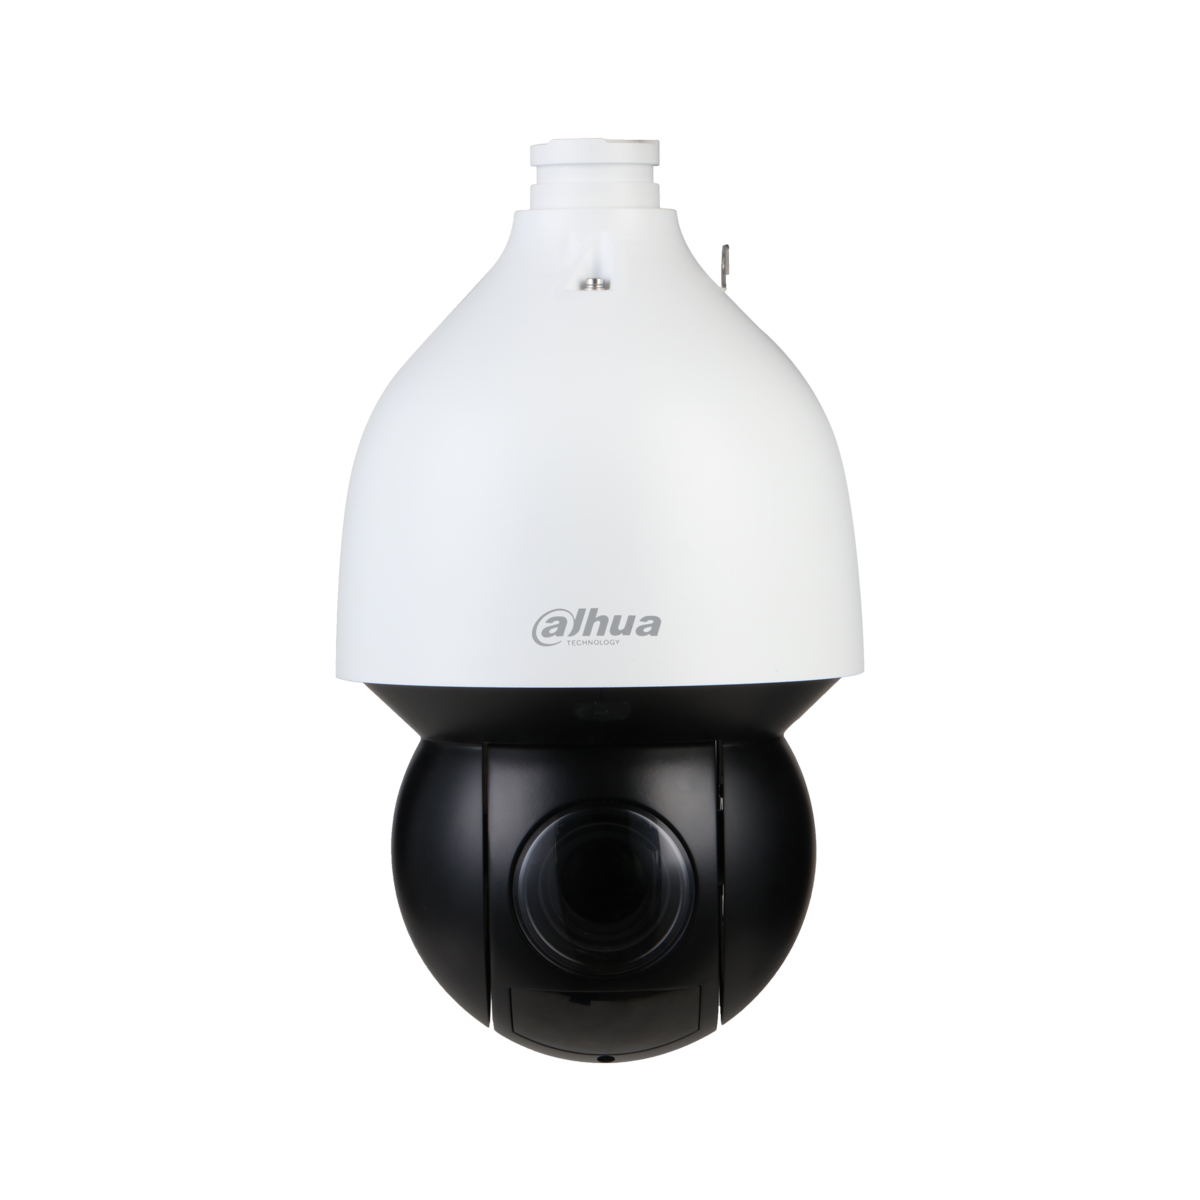 WIZSENSE SERIES IP CAMERA WHITE AUTO TRACKING 4MP H.264/4+/5/5+ SPEED DOME PTZ 120 WDR METAL 5.4-135MMMOTORISED LENS 25X ZOOM STARLIGHT+ IR 150M POE+ IP67 WITHOUT MIC AUDIO IN AUDIO OUT 2 x ALARM IN 1 x ALARM OUT SUPPORT UP TO 512GB SDIK10 24VDC